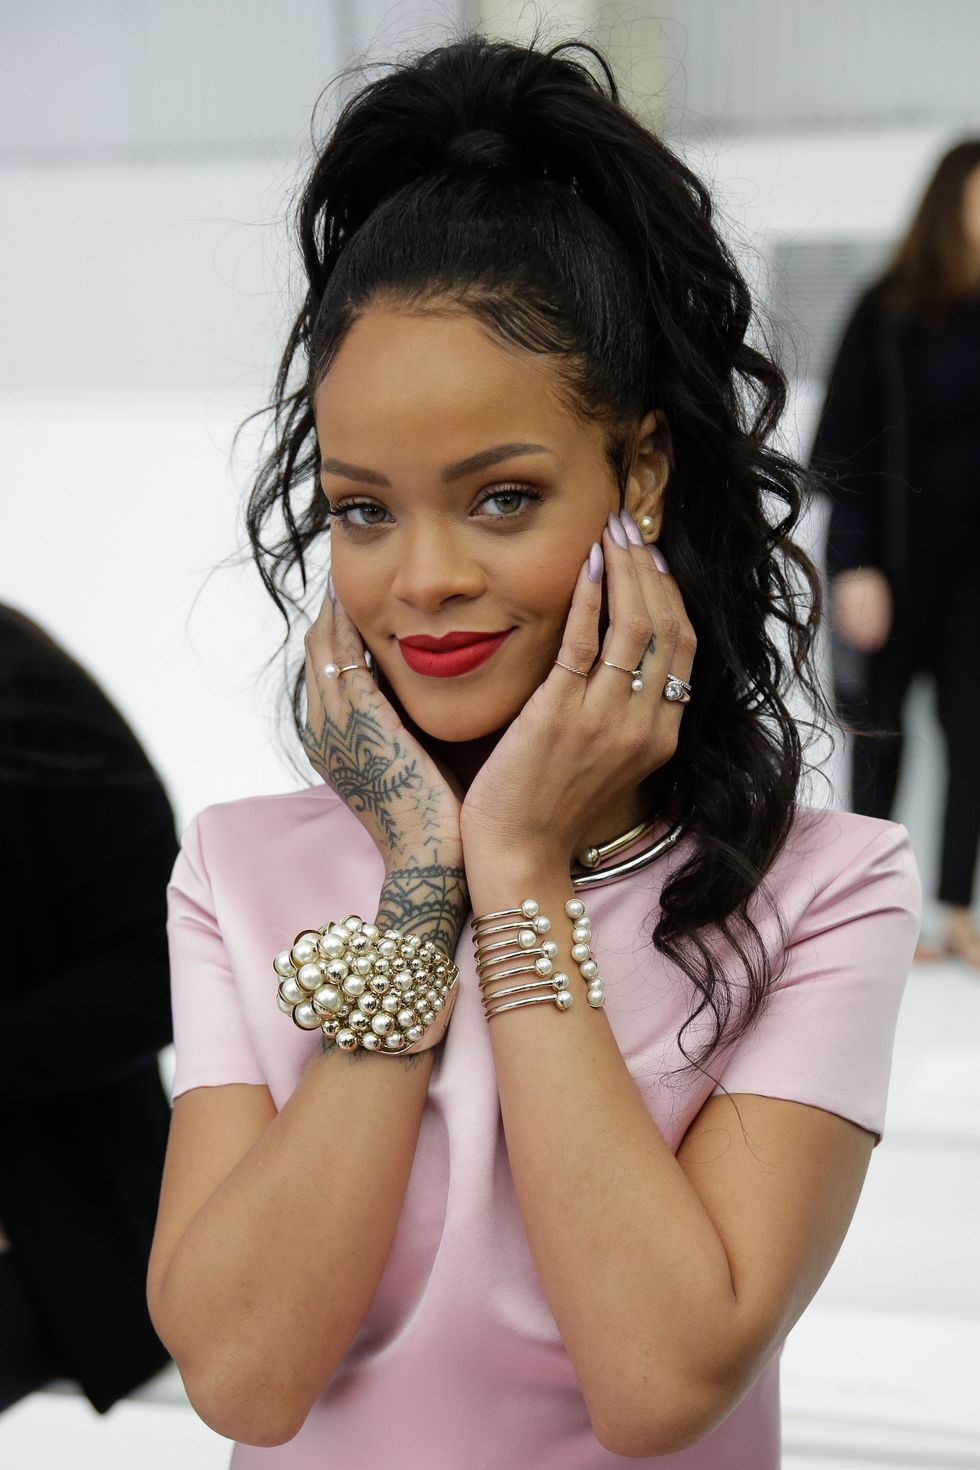 brooklyn, ny   may 07  rihanna attends the christian dior cruise 2015 show at brooklyn navy yard on may 7, 2014 in the brooklyn borough of brooklyn, new york  photo by jp yimgetty images